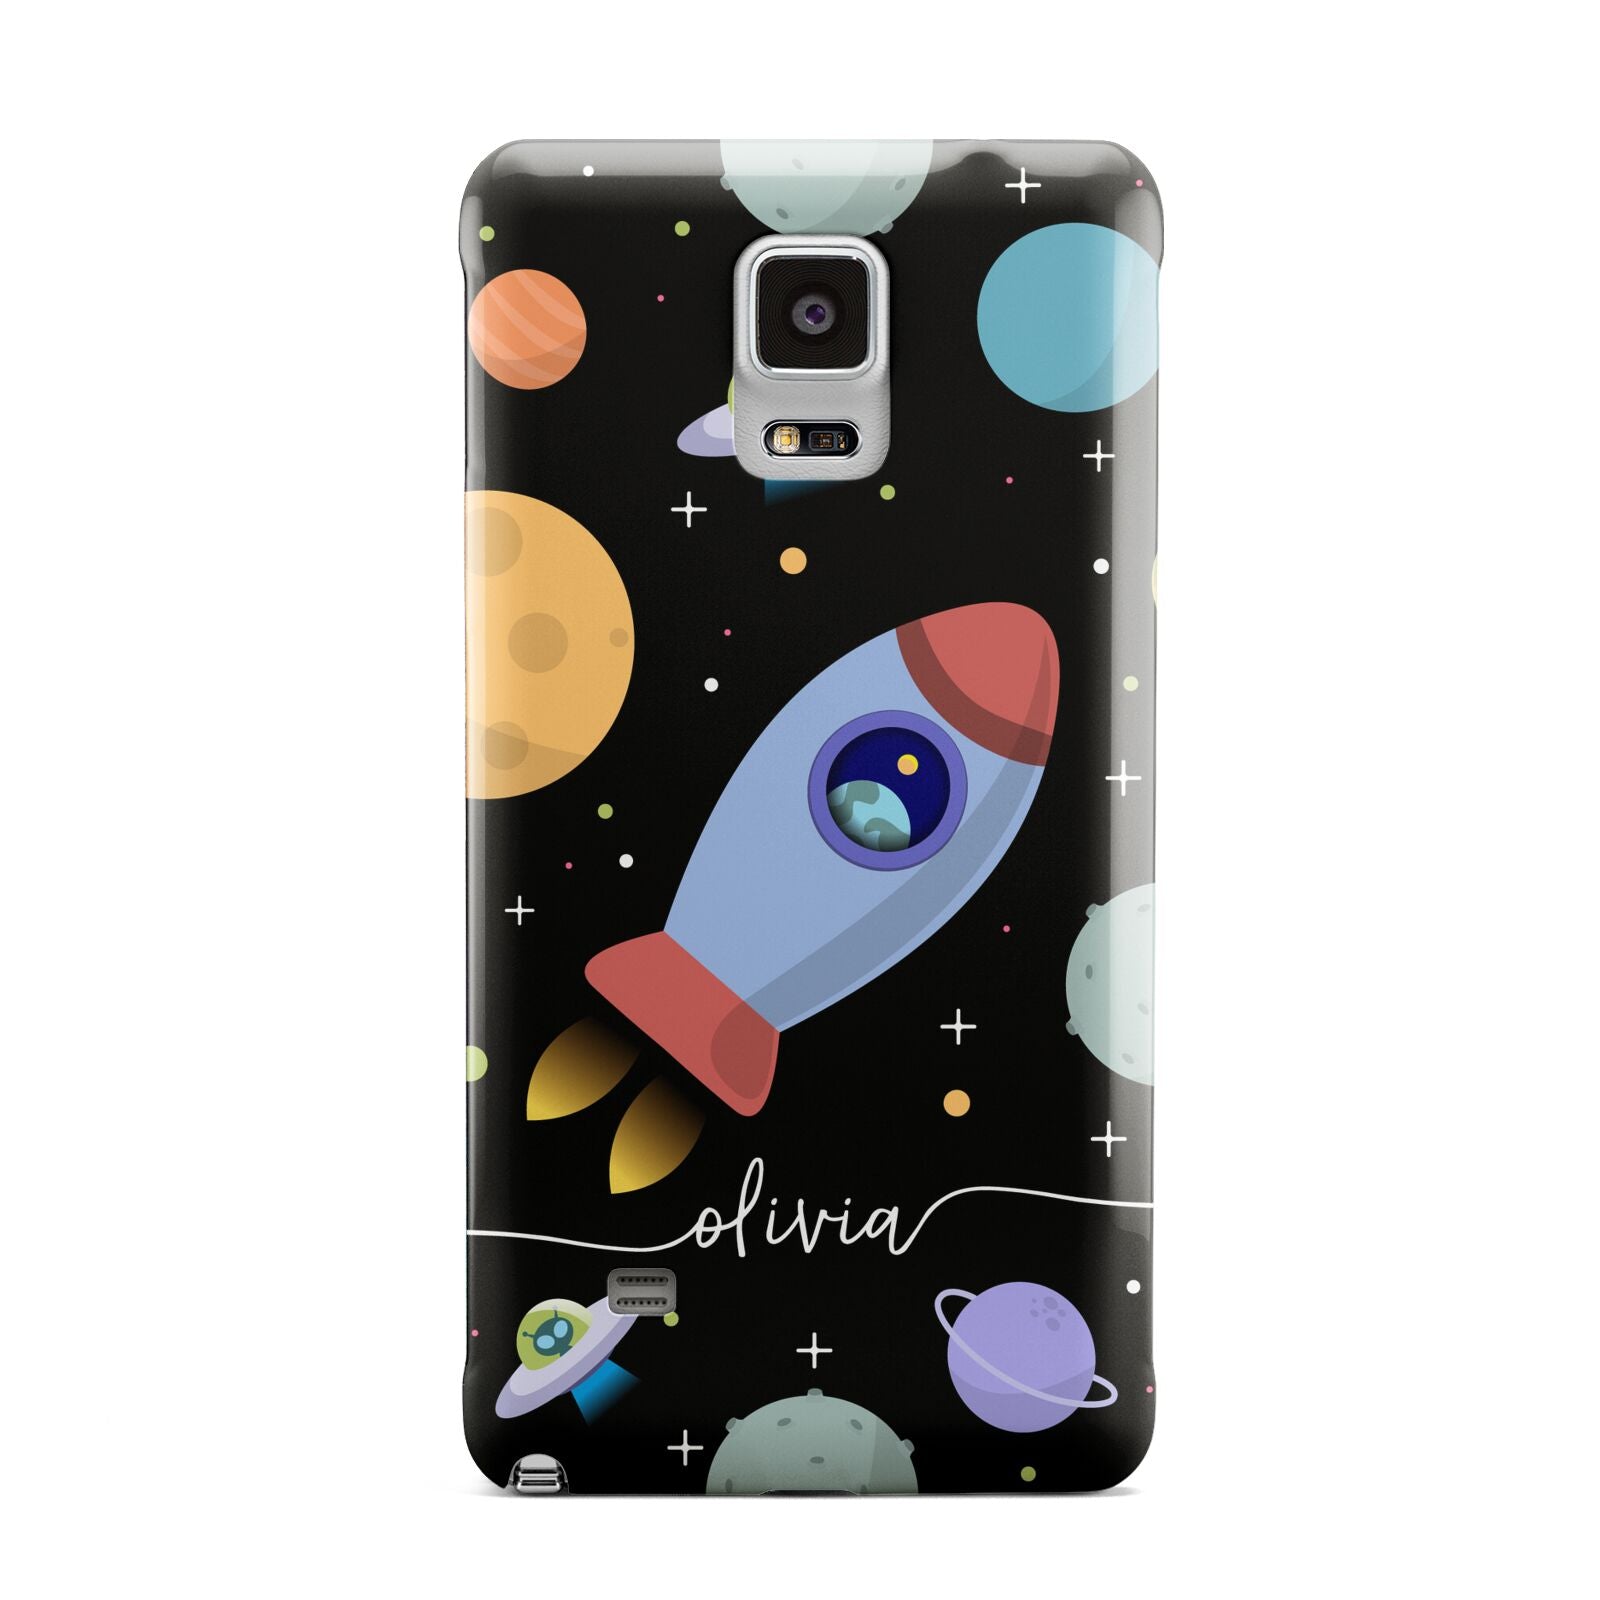 Fun Space Scene Artwork with Name Samsung Galaxy Note 4 Case